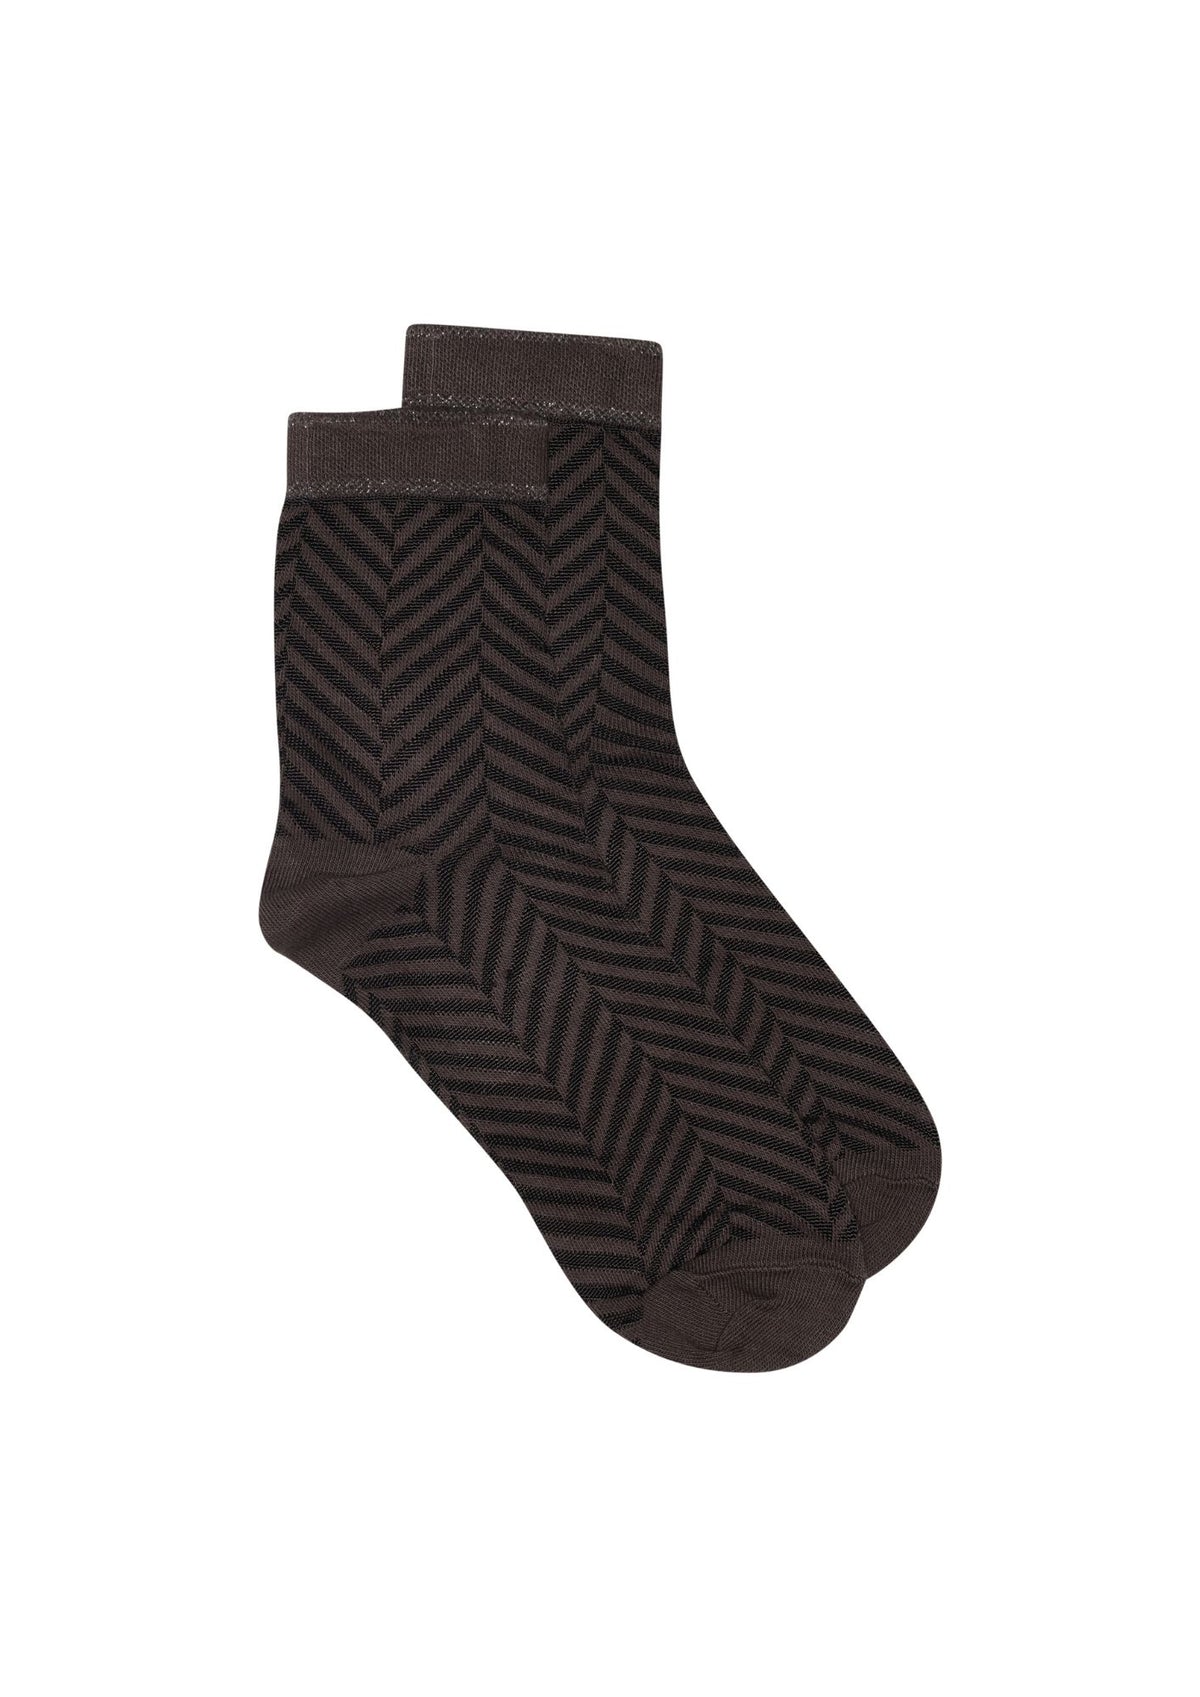 Kaila Short Sock Brown with pattern design and sparkle trim